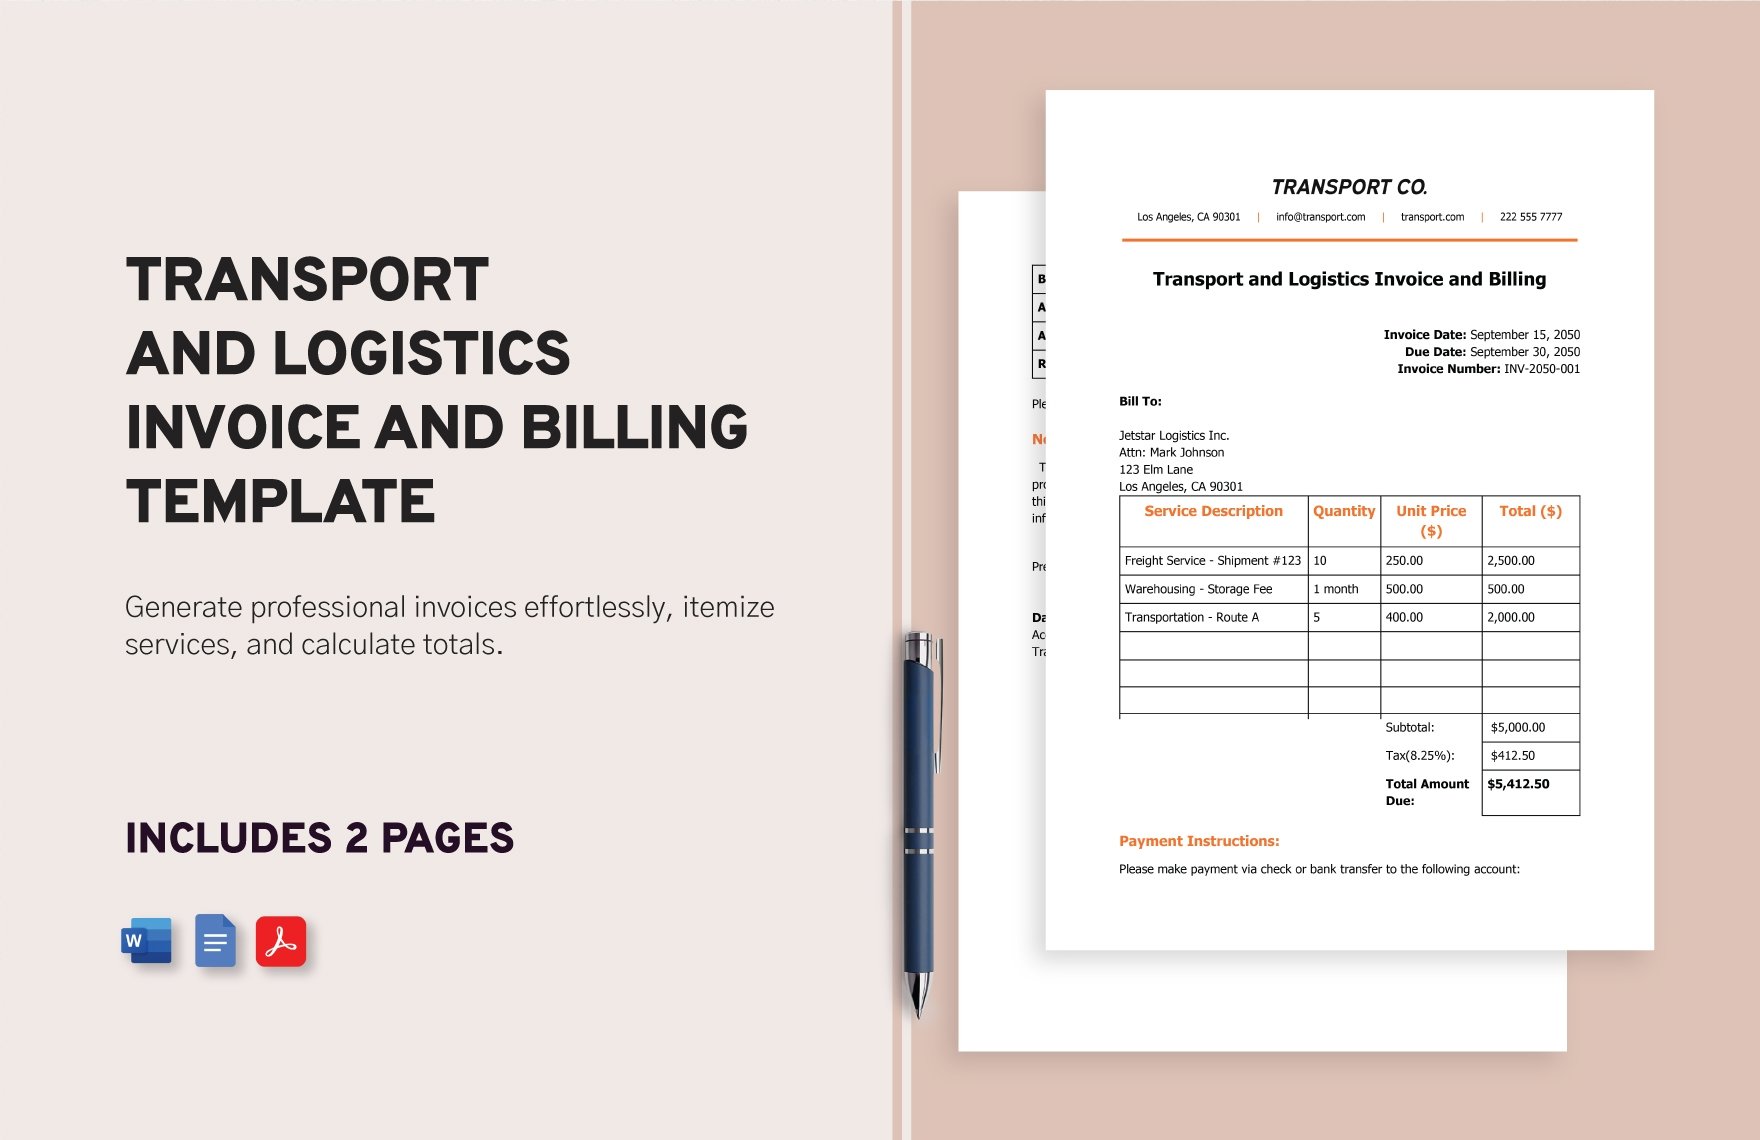 Transport and Logistics Invoice and Billing Template